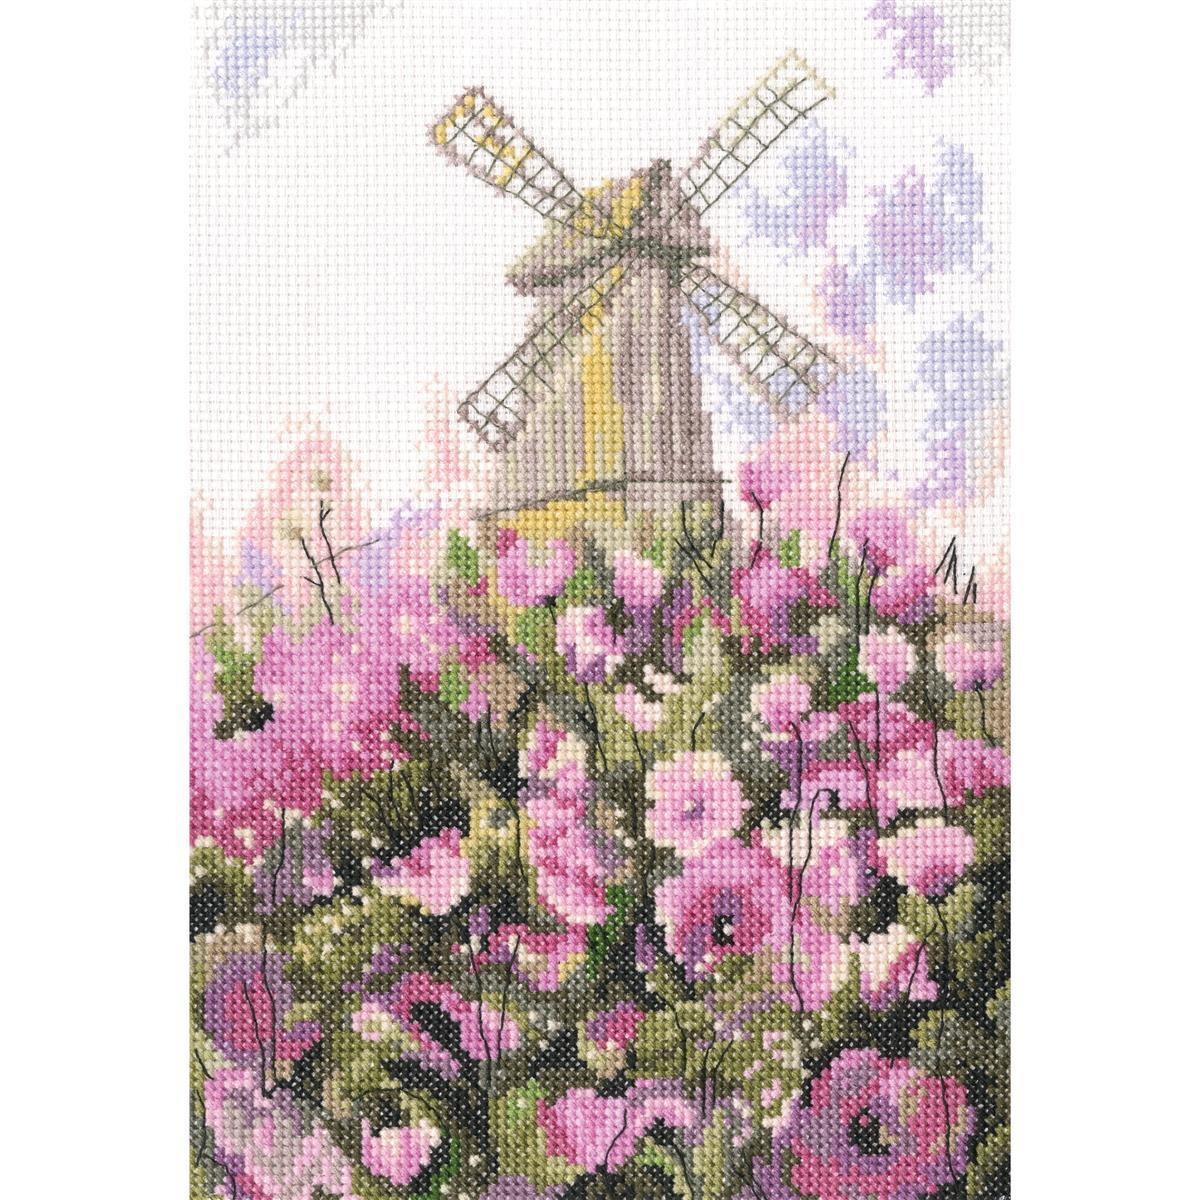 RTO counted Cross Stitch Kit "Old mill" M551,...